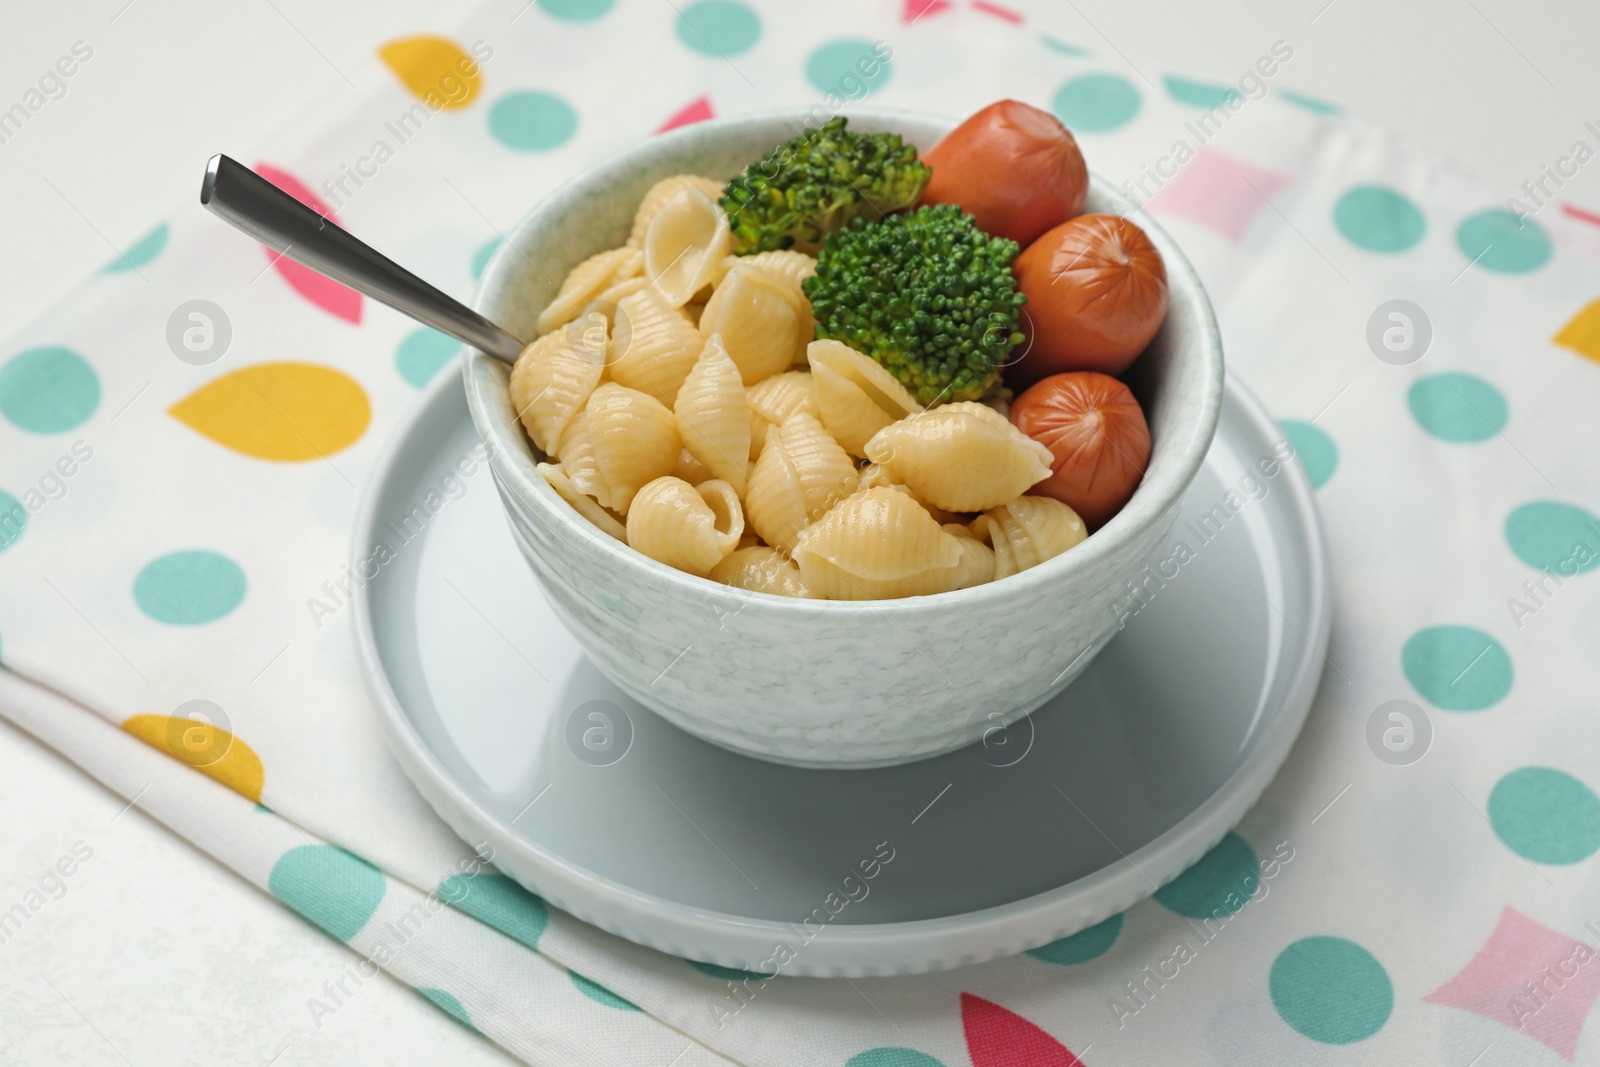 Photo of Bowl with tasty pasta, sausages and broccoli on table